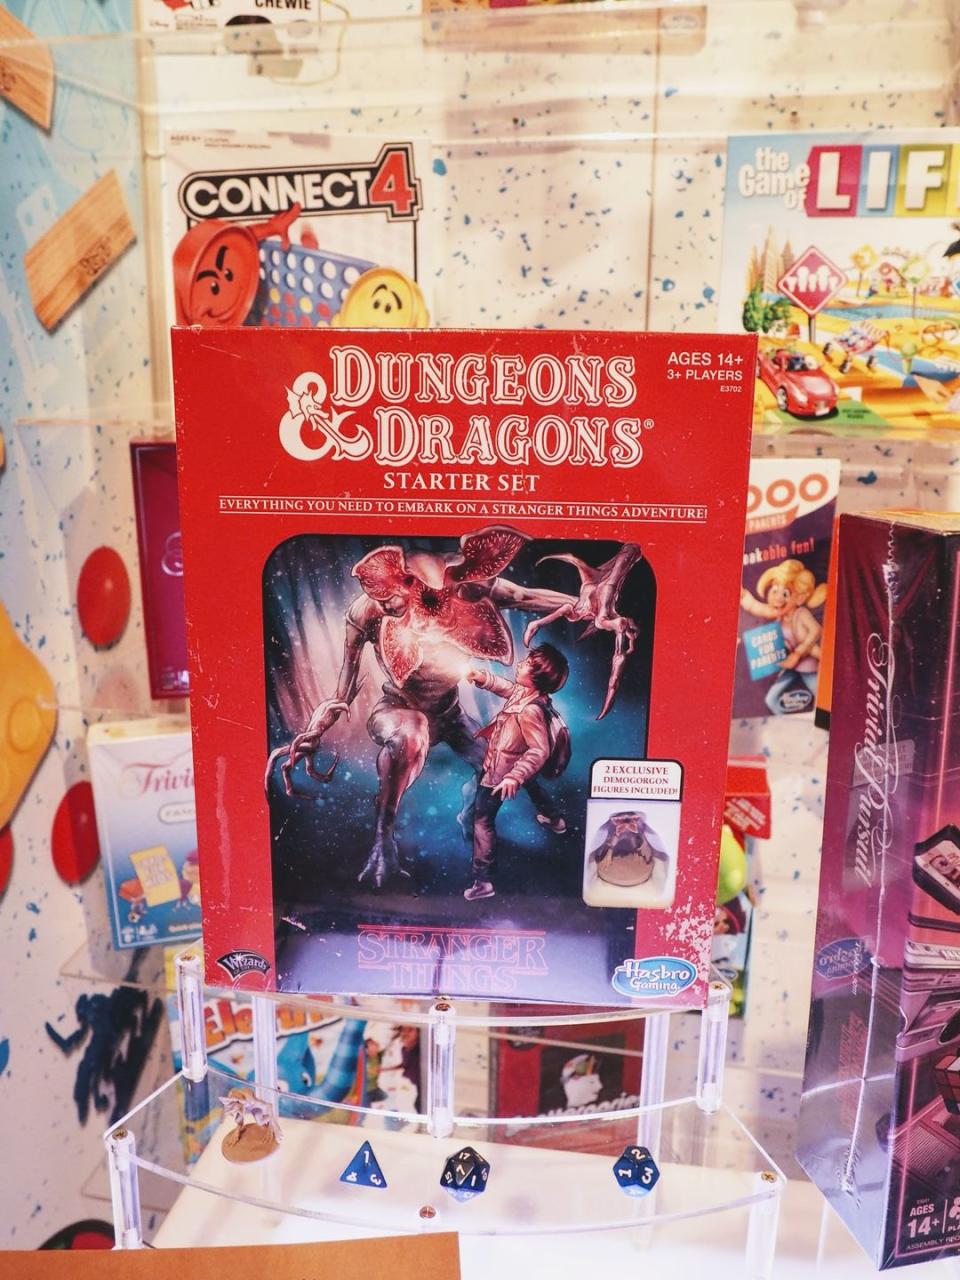 A 'Stranger Things' Dungeons & Dragons adventure to get your friends hooked on rolling d20s